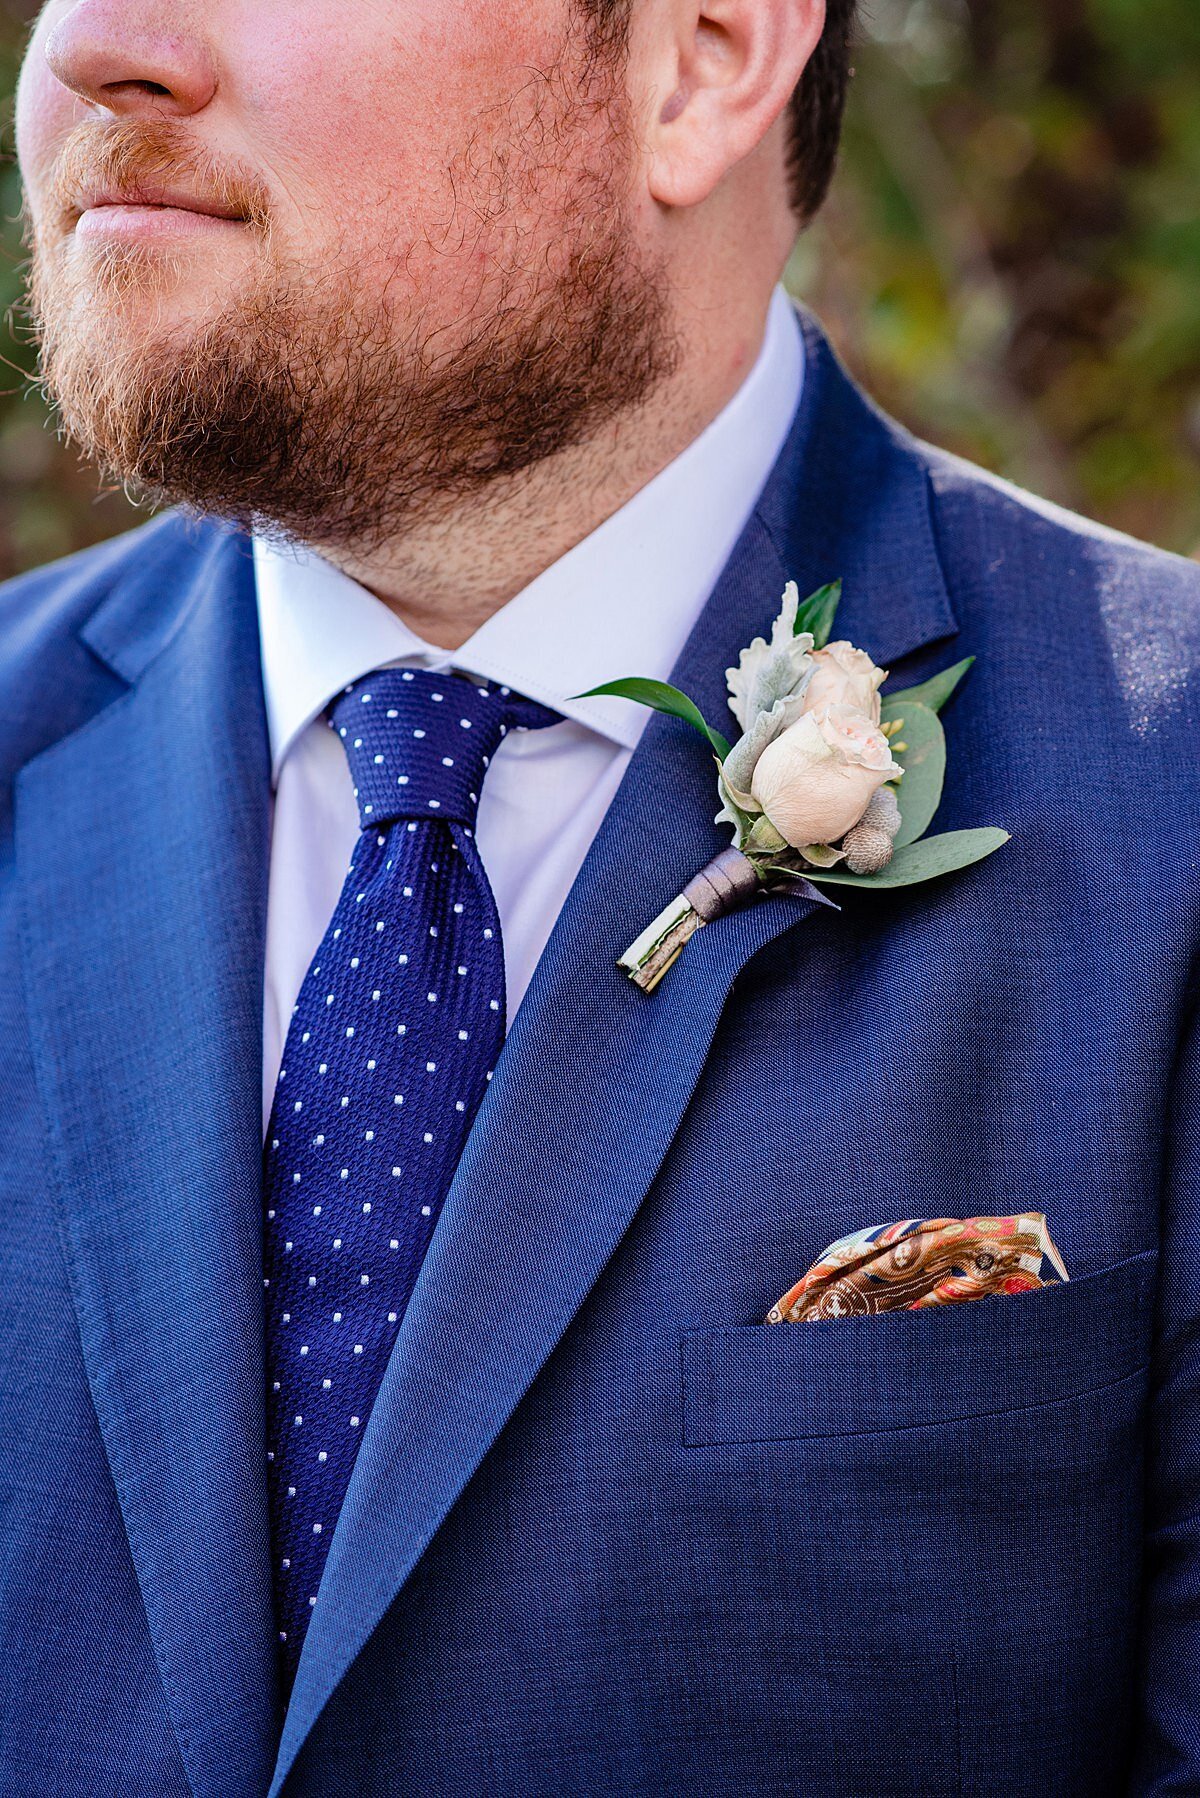 The groom, wearing a bright blue suit and blue swiss polkadot tie with an accenting pink pocket square. Detail photo of the groom's white rose boutonniere.